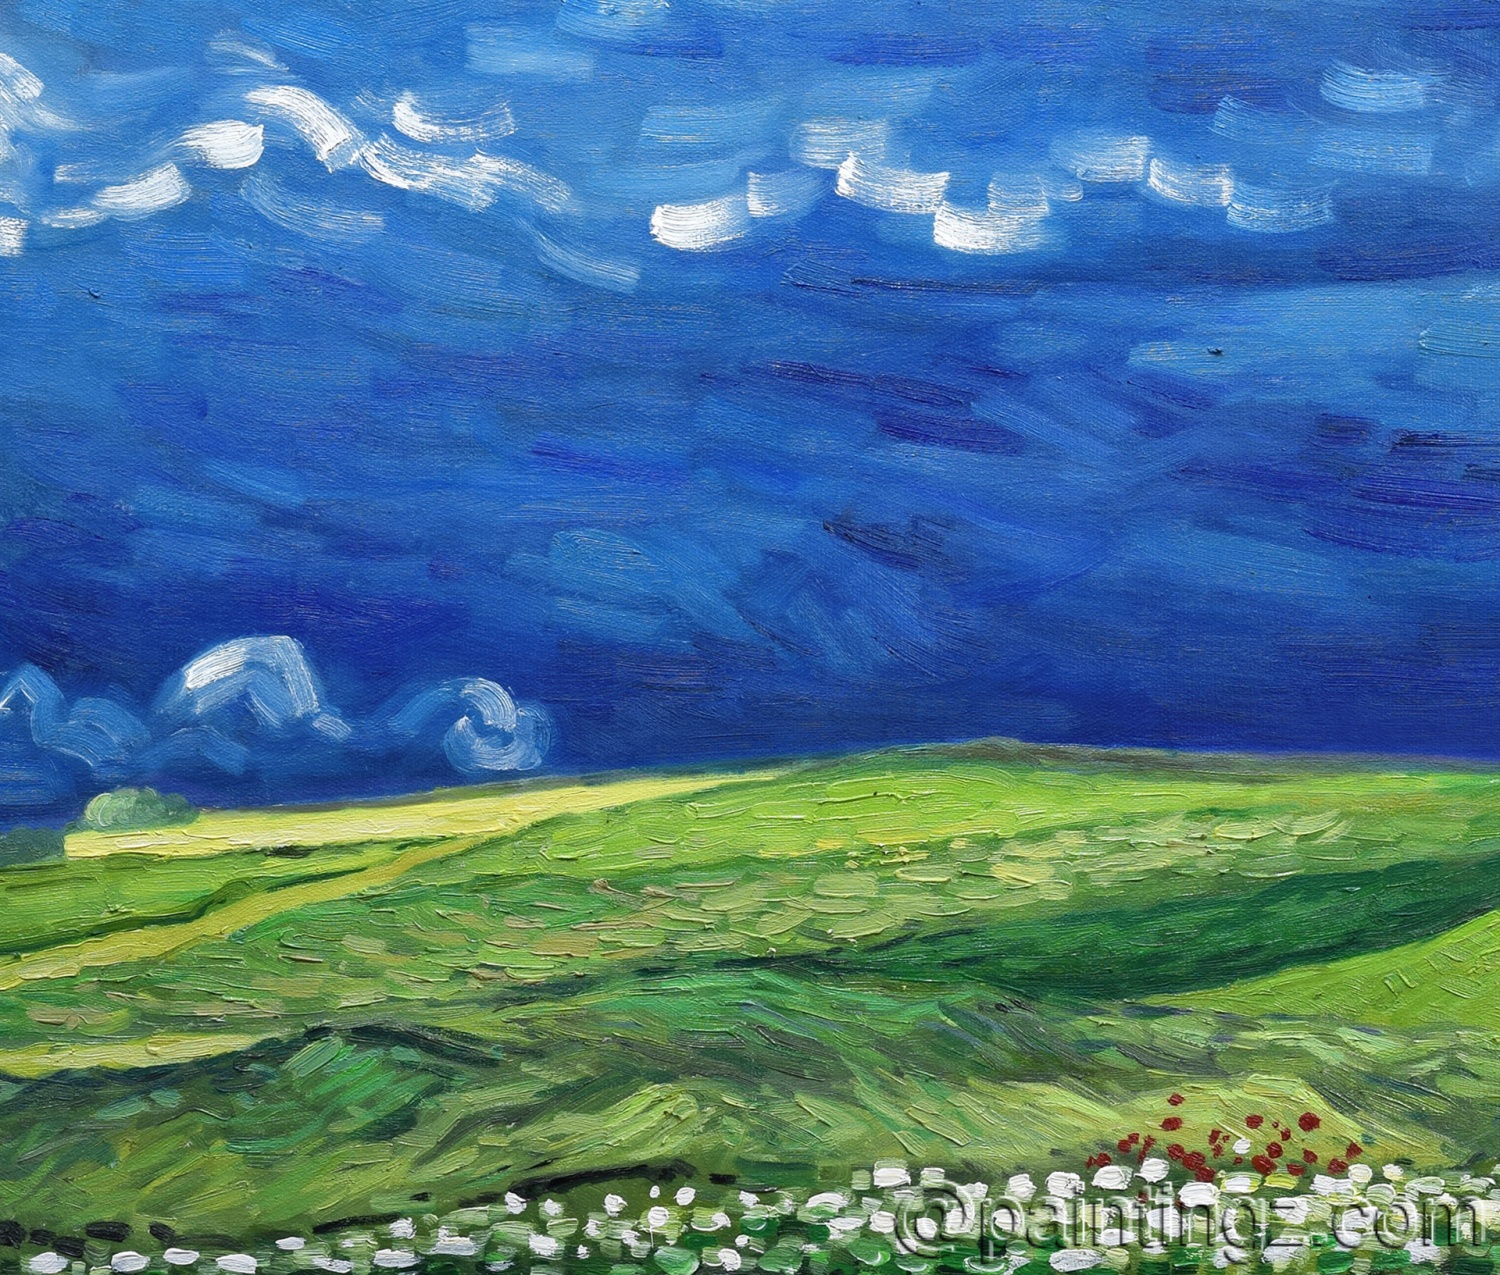 Close-up of Reproduction Painting of Wheatfields under Thunderclouds